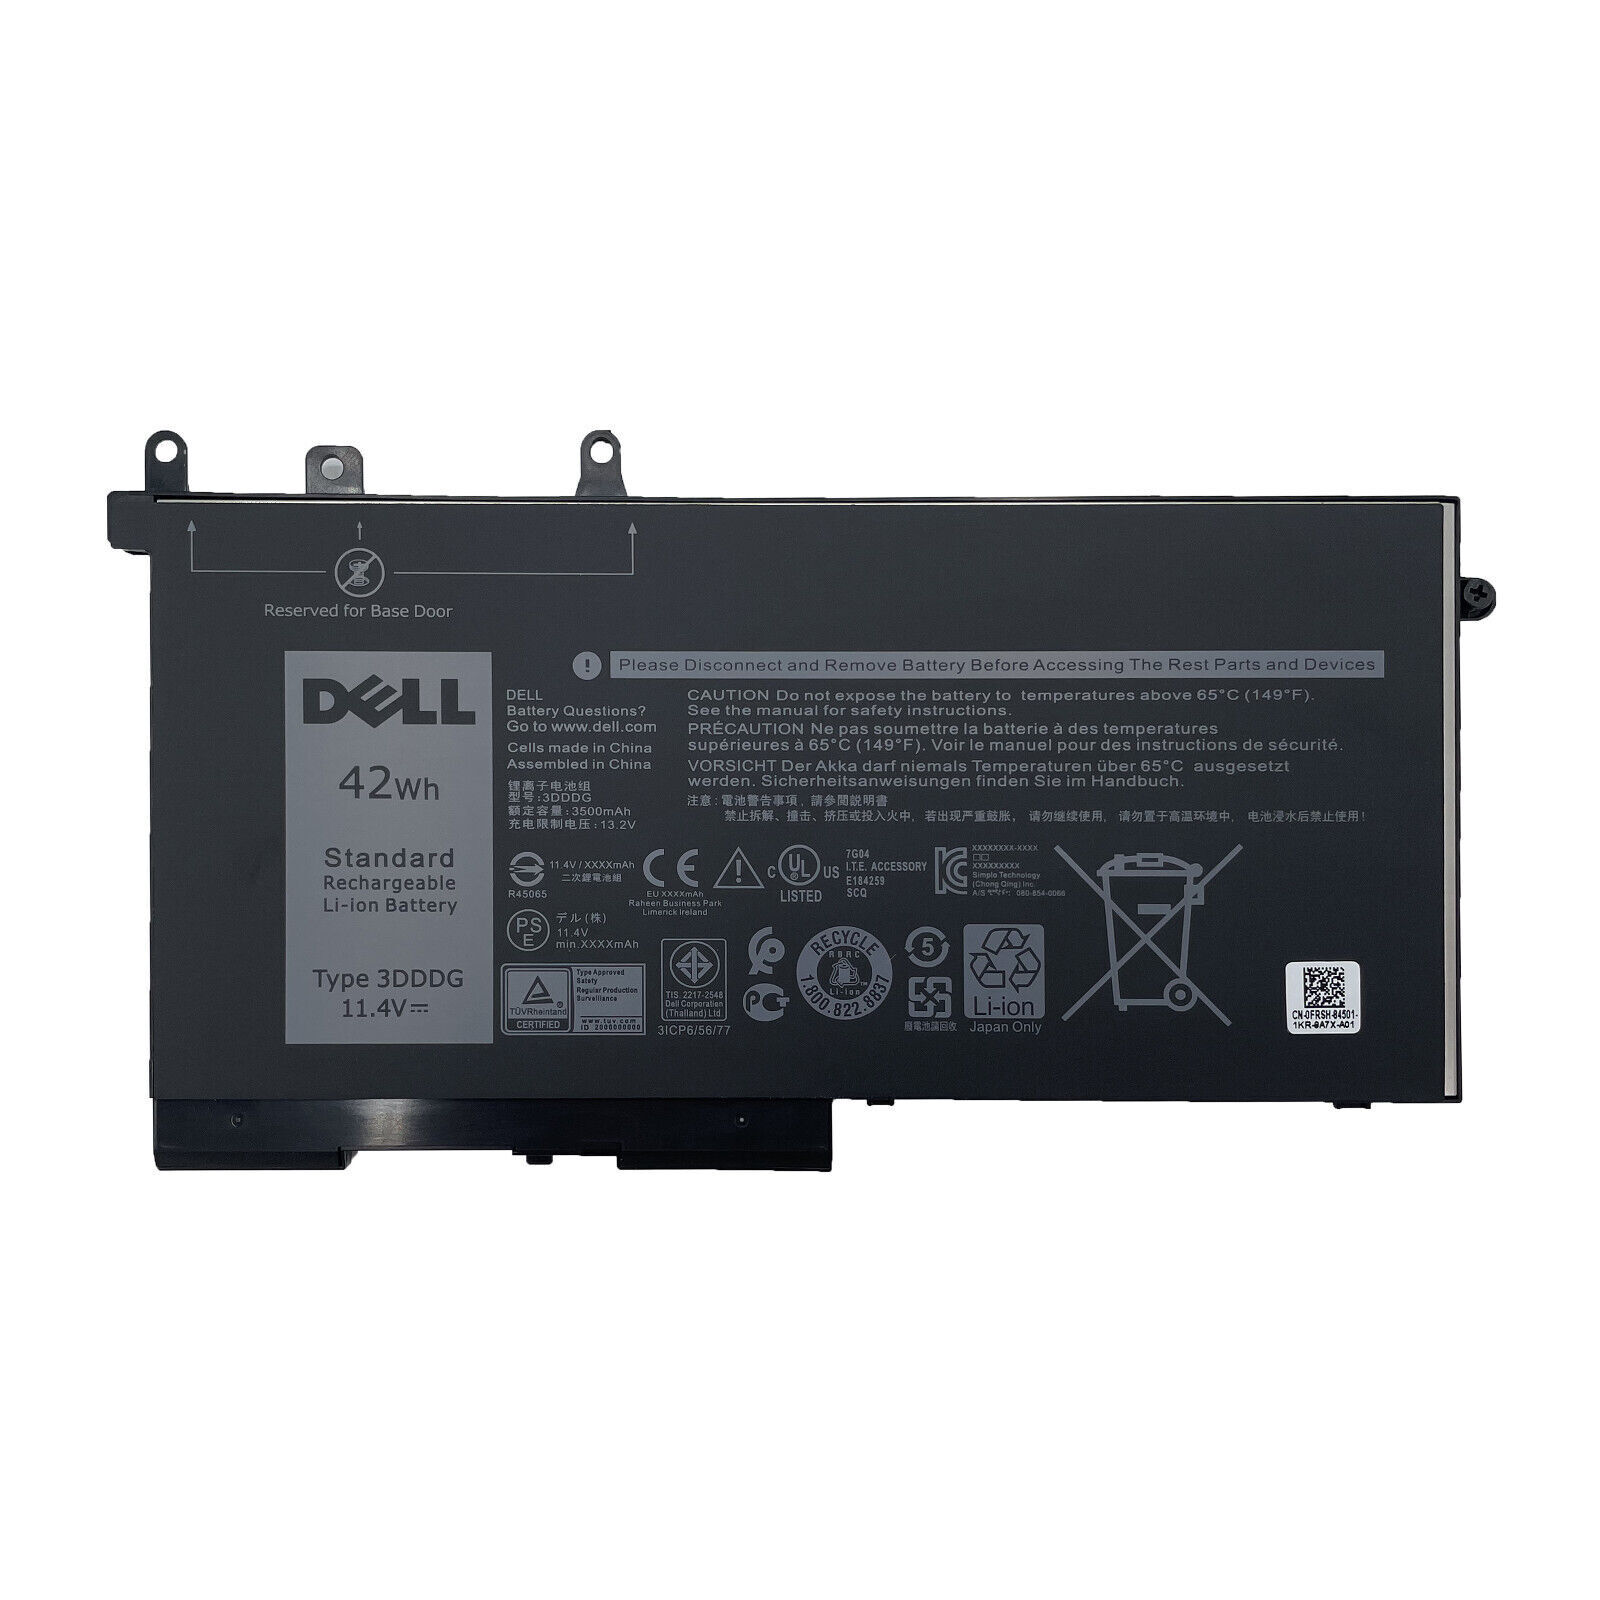 Genuine 42Wh 3DDDG attery For Dell Latitude 5280 5288 5290 5480 5488 5490 5590